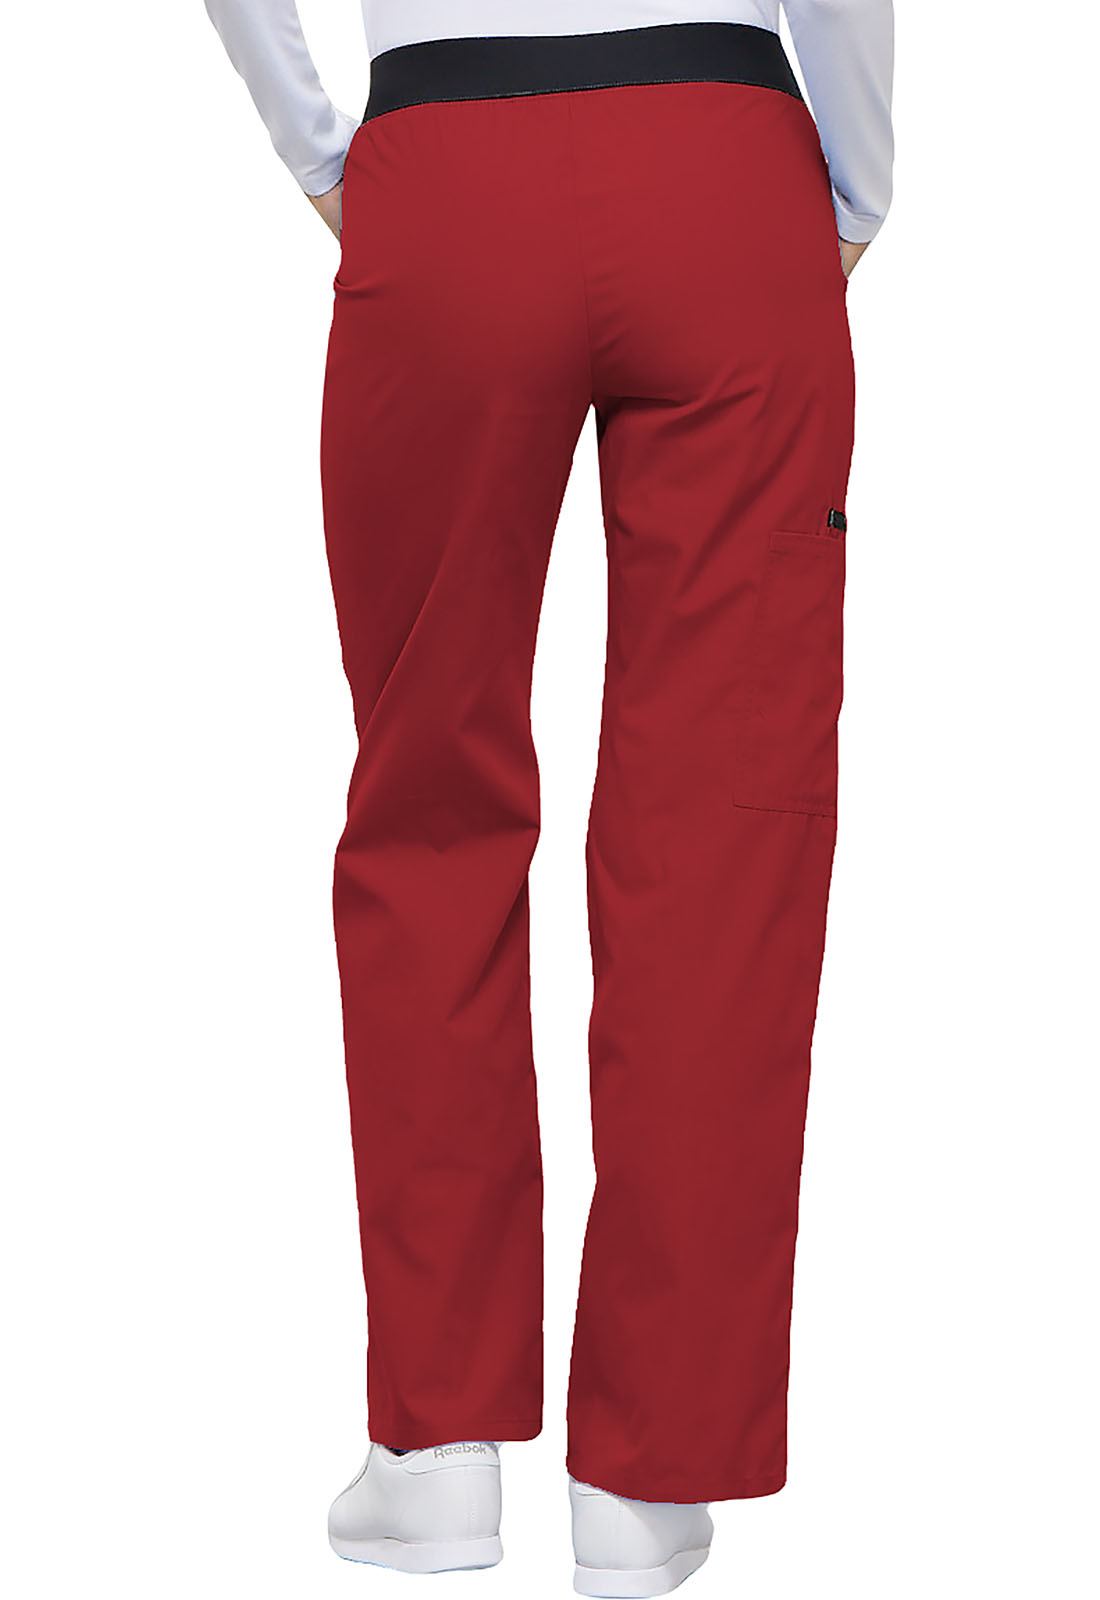 Flexibles Mid Rise Knit Waist Pull-On Pant in Red 1031-REDB from ...